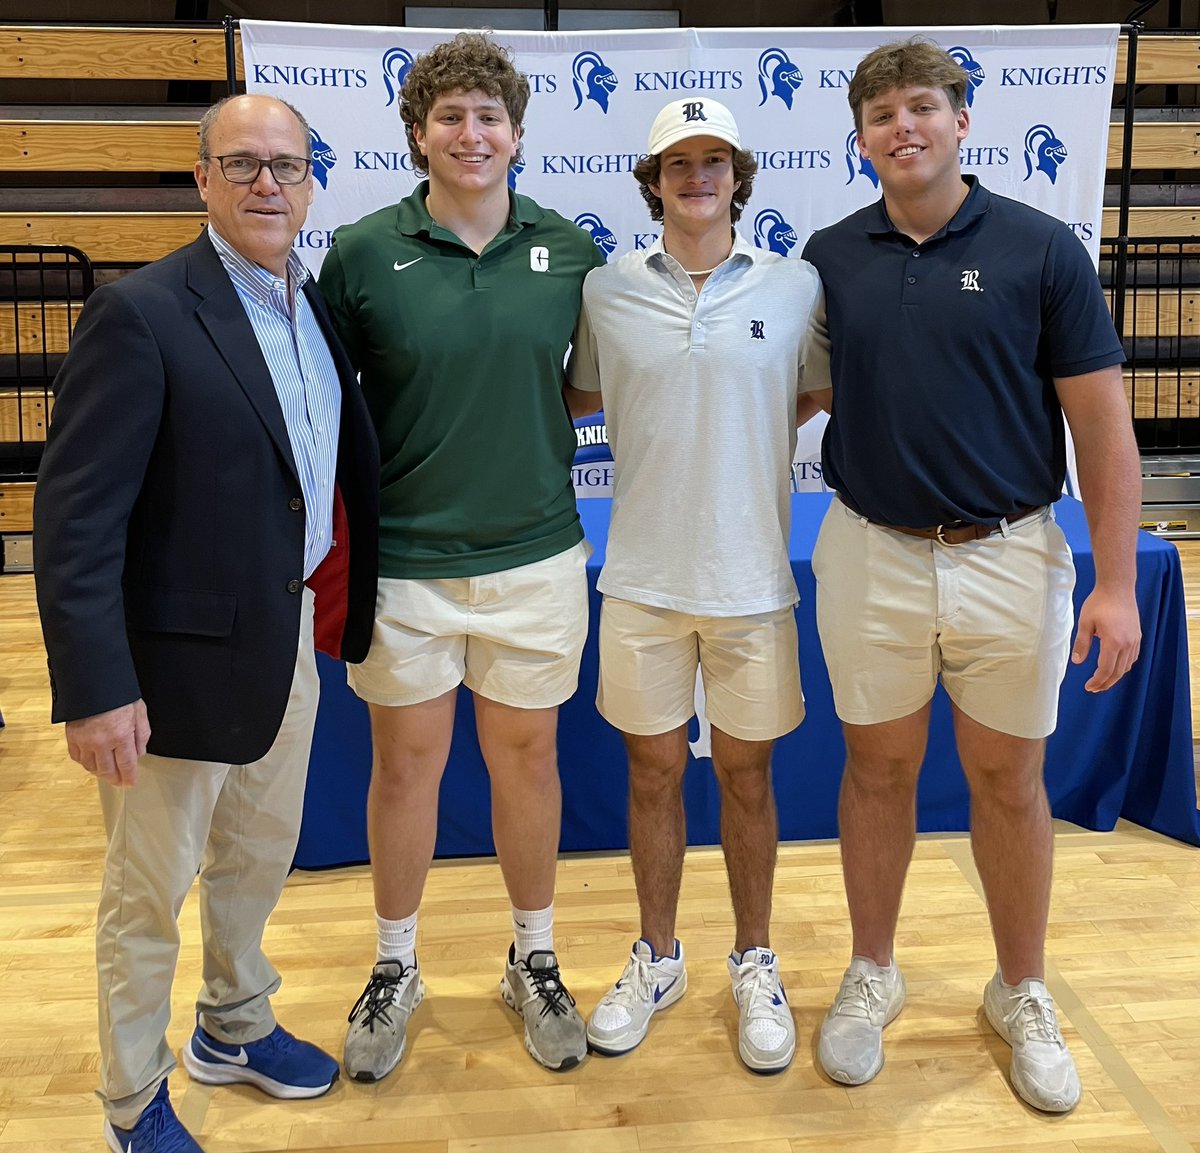 More EHS Knight football players making commitments. Anthony Saragusa heading to UNC-Charlotte, Jackson Ranucci and Cullen Witt heading to Rice. @asaragusa24 @ranucci_jackson @cullen_witt @EHSSports #KnightsStandOut Don’t Be Scared To Be Great!!